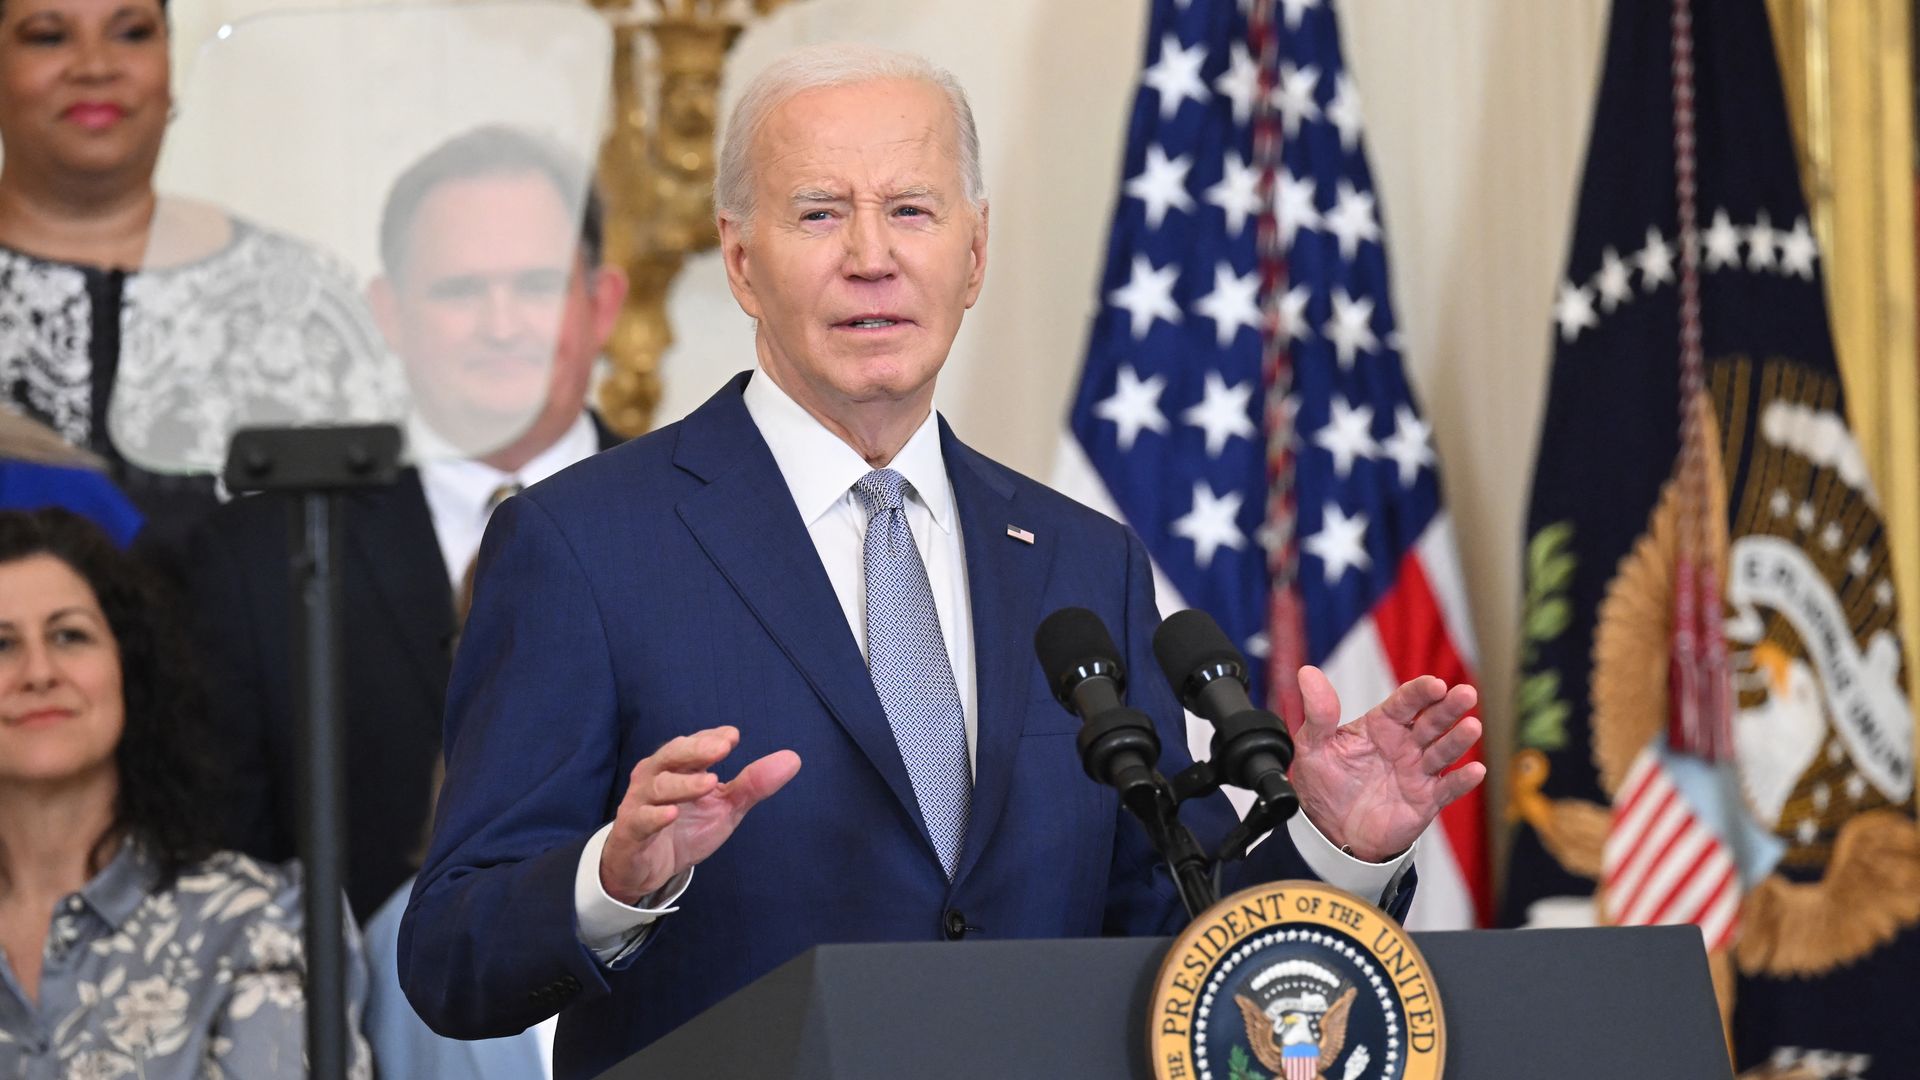 President Biden, wearing a blue suit, white shirt and blue tie.